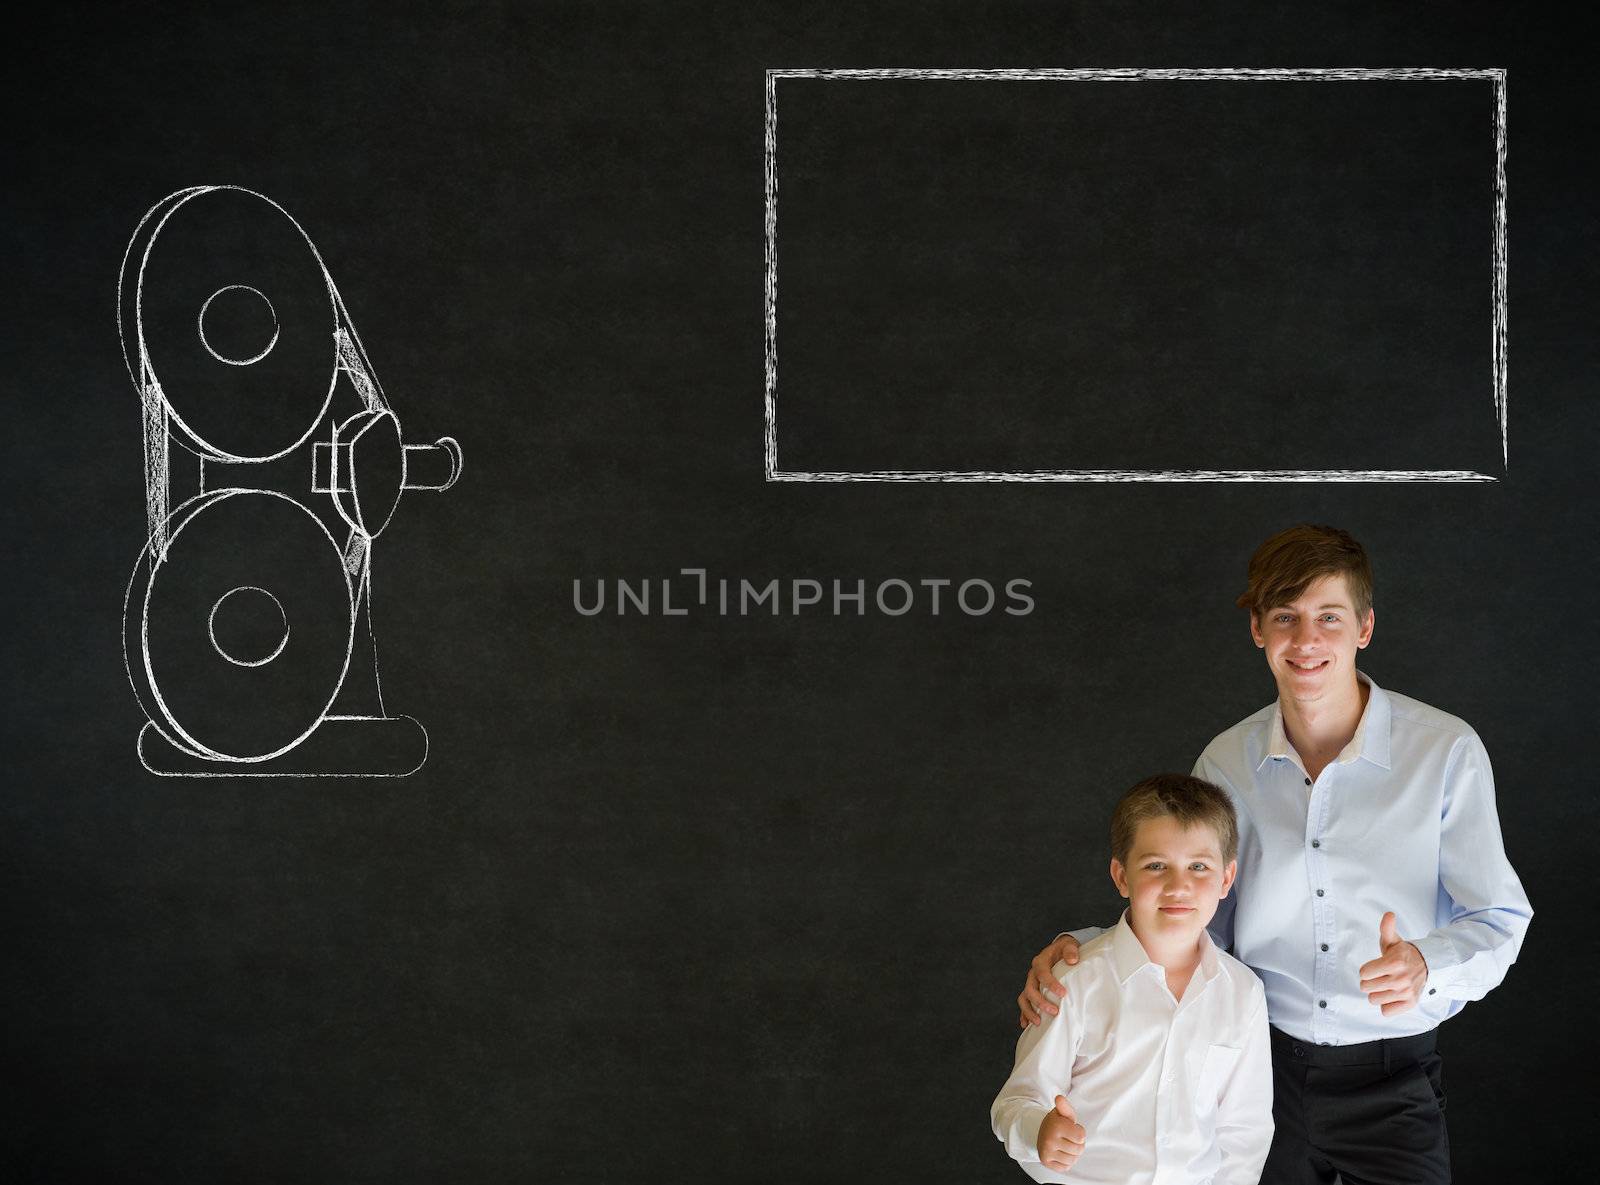 Thumbs up boy dressed up as business man with teacher man and retro chalk film projector on blackboard background